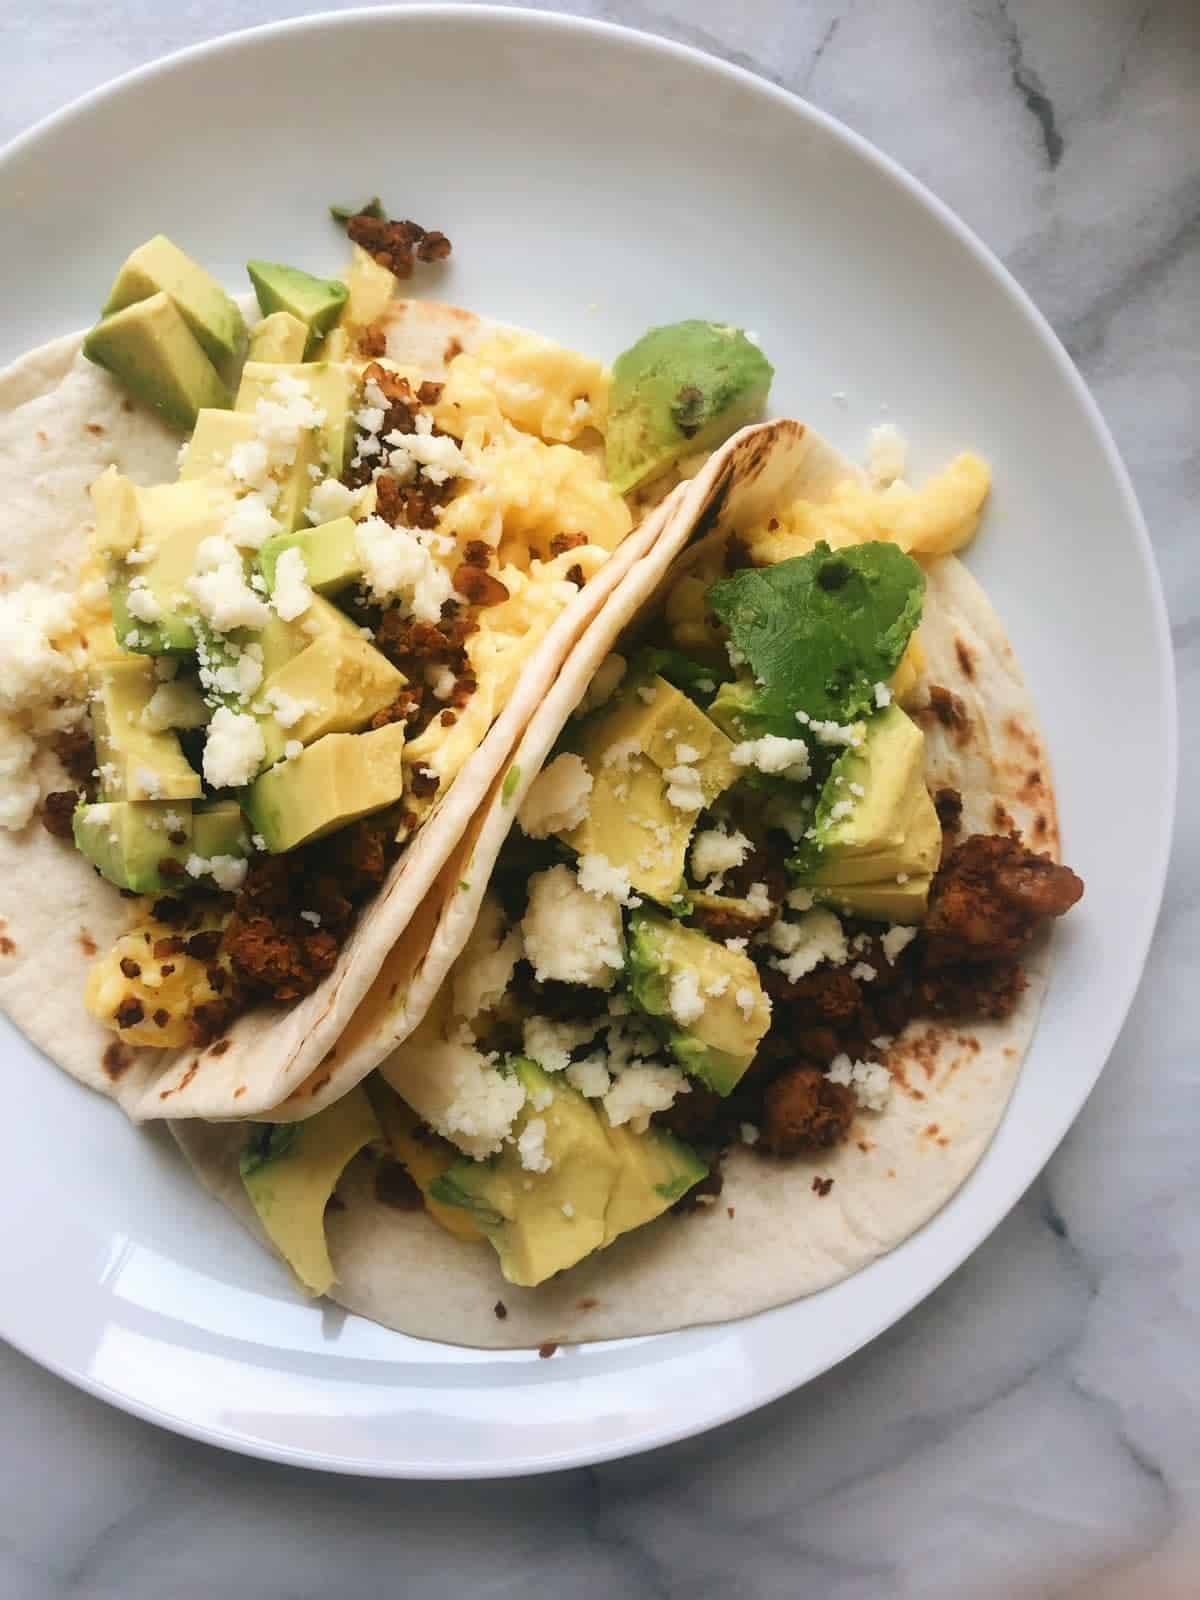 Breakfast tacos on a plate.